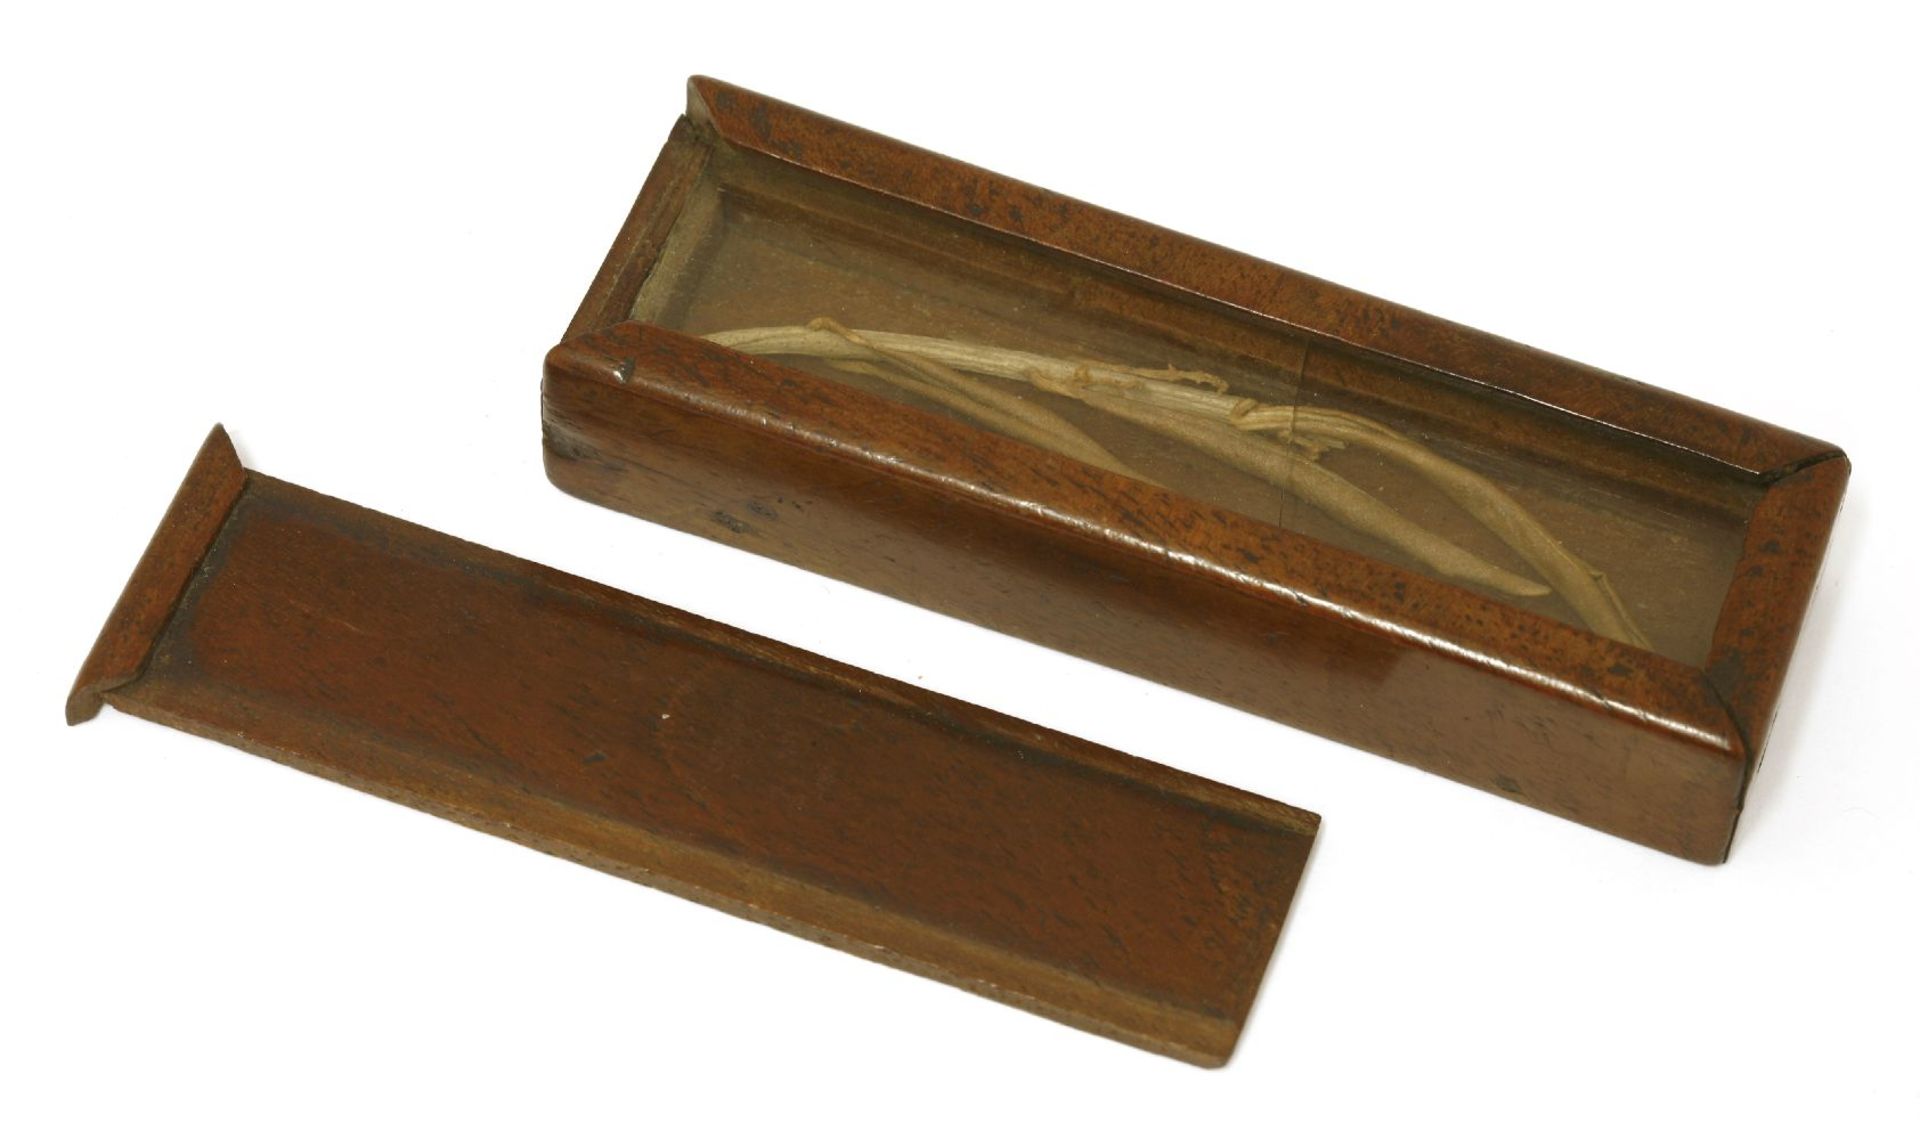 A mahogany rectangular box, c.1841, with a sliding top enclosing a glazed compartment and an olive